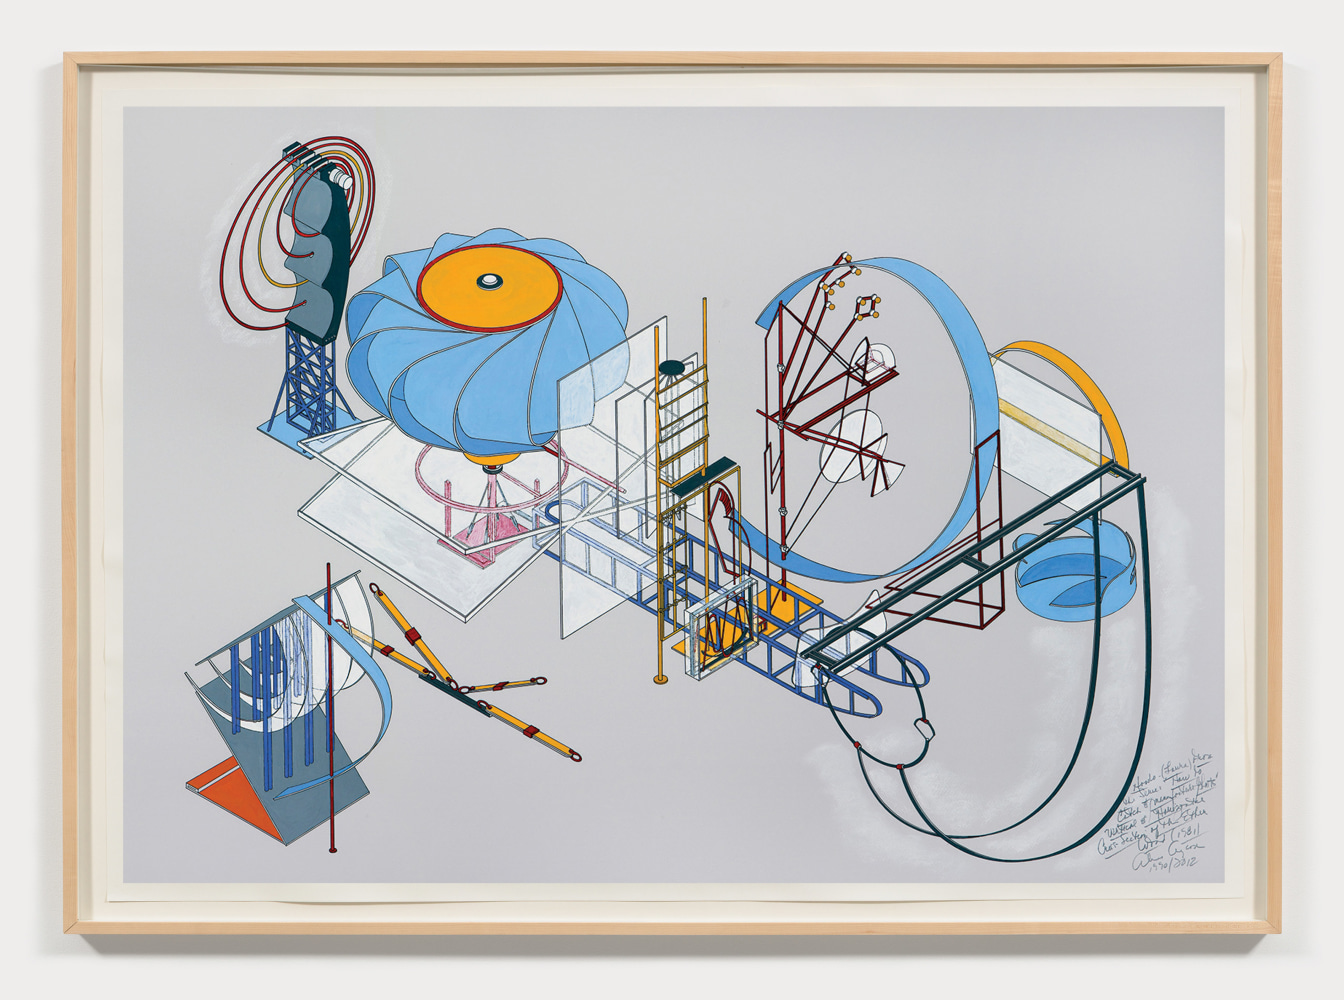 Hoodo (Laura) from the Series &amp;quot;How to Catch and Manufacture Ghosts&amp;quot; - Vertical and Horizontal Cross-section of the Ether Wind (1981), 1990/2012

watercolor and ink on paper

27 1/2 x 39 1/4 in. (69.8 x 99.7 cm)